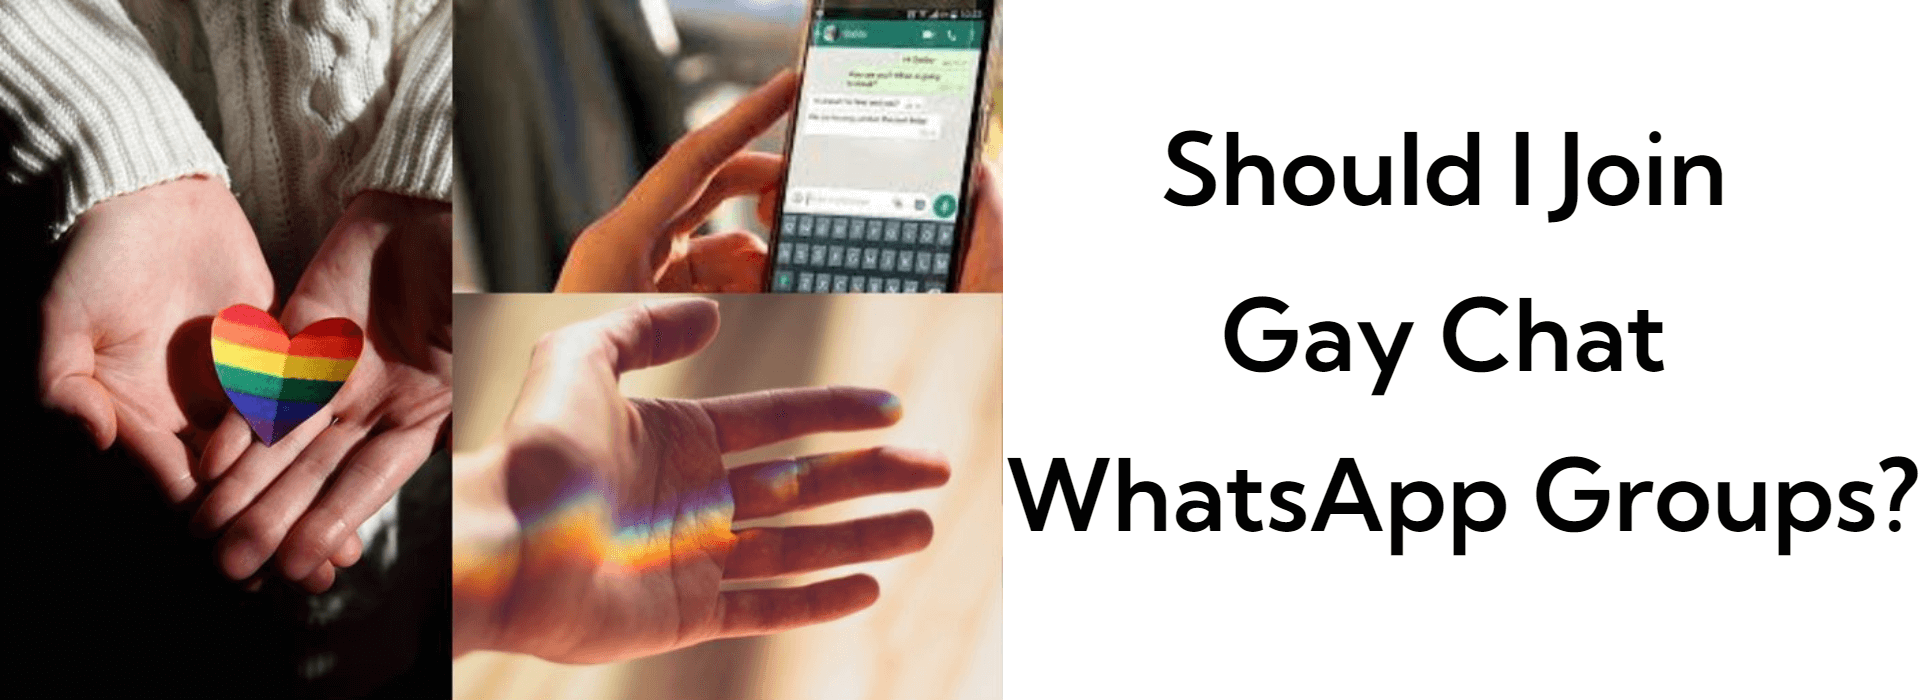 should i goin gay chat whatsapp groups